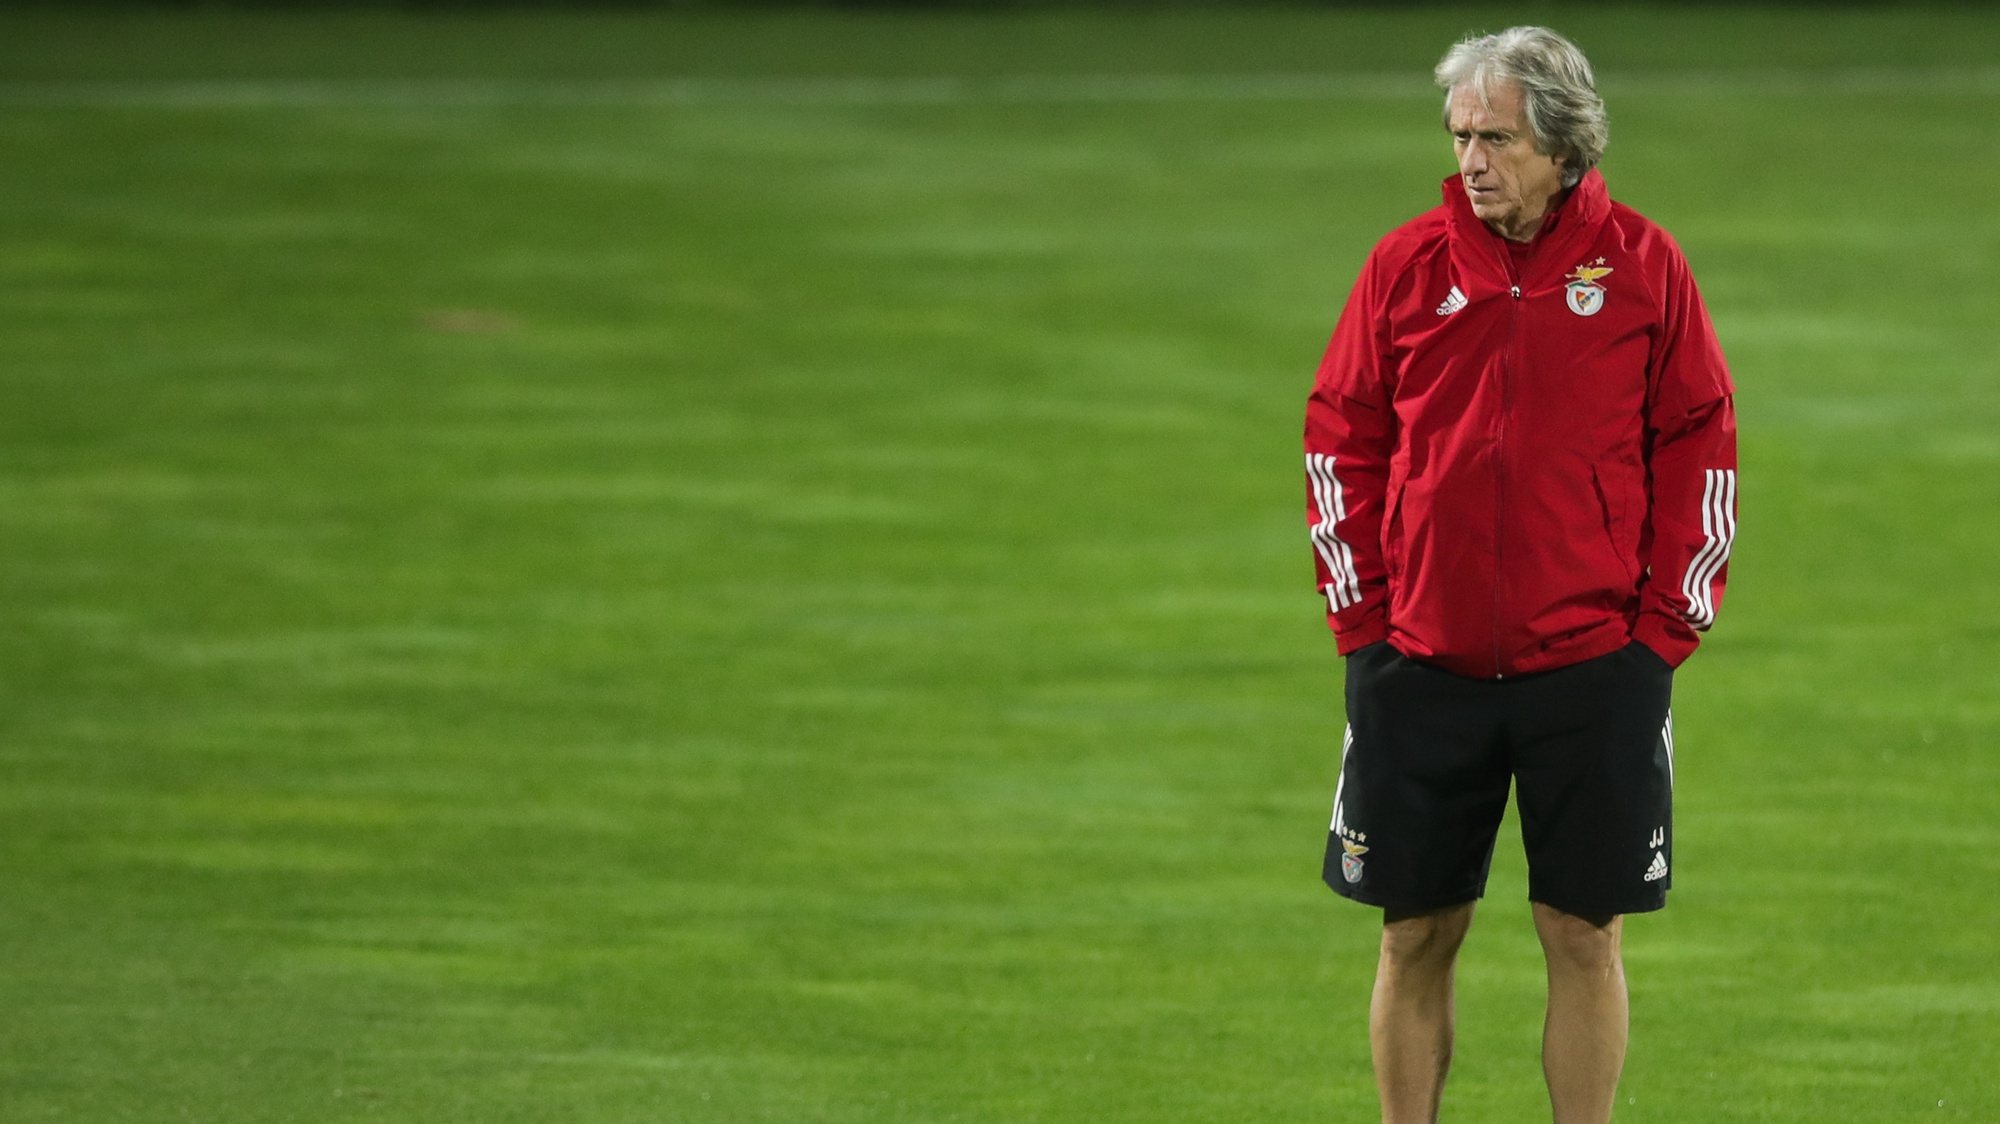 SL Benfica&#039;s head coach Jorge Jesus leads a training session at Benfica Campus in Seixal, near Lisbon, Portugal, 2 December 2020. SL Benfica will play against Lech Poznan in their UEFA Europa League Group D match on 3 November 2020. MÁRIO CRUZ/LUSA